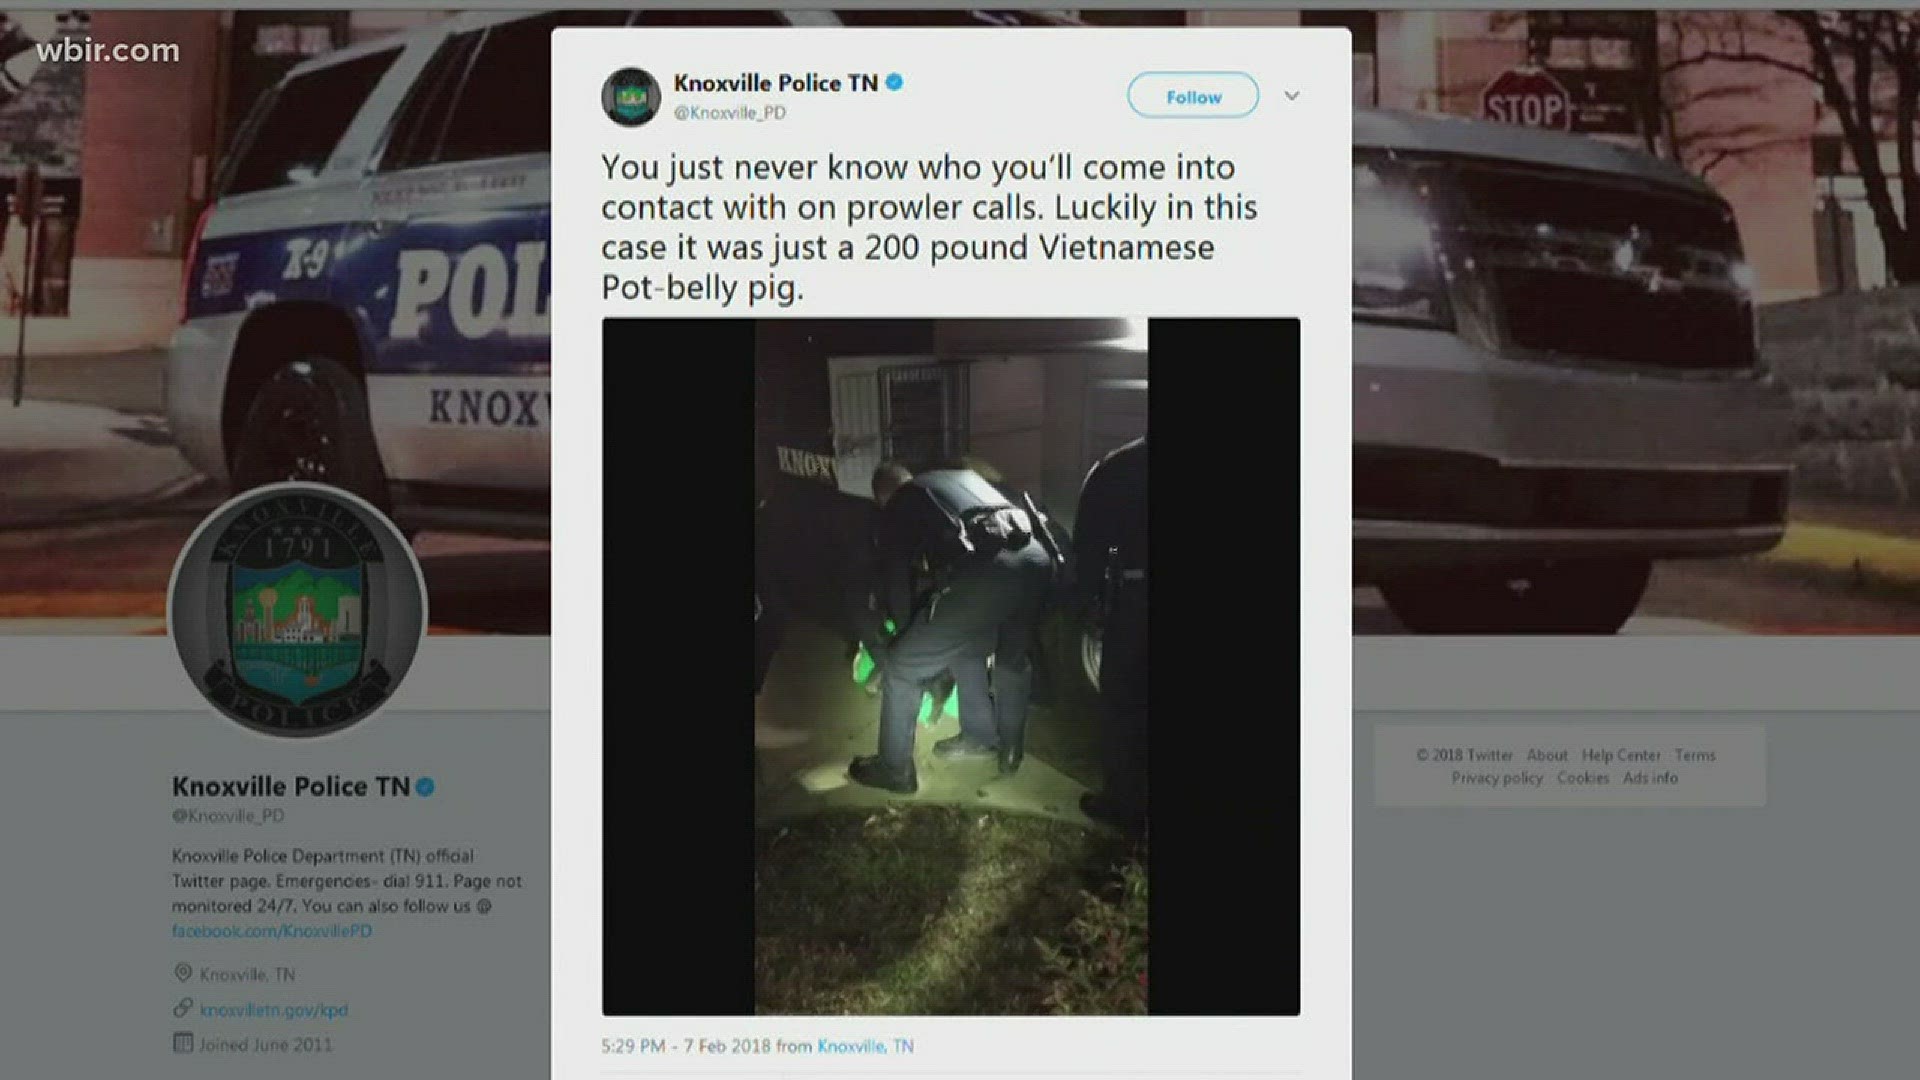 Feb. 7, 2018: Police officers never know what they find when they respond to prowler calls.